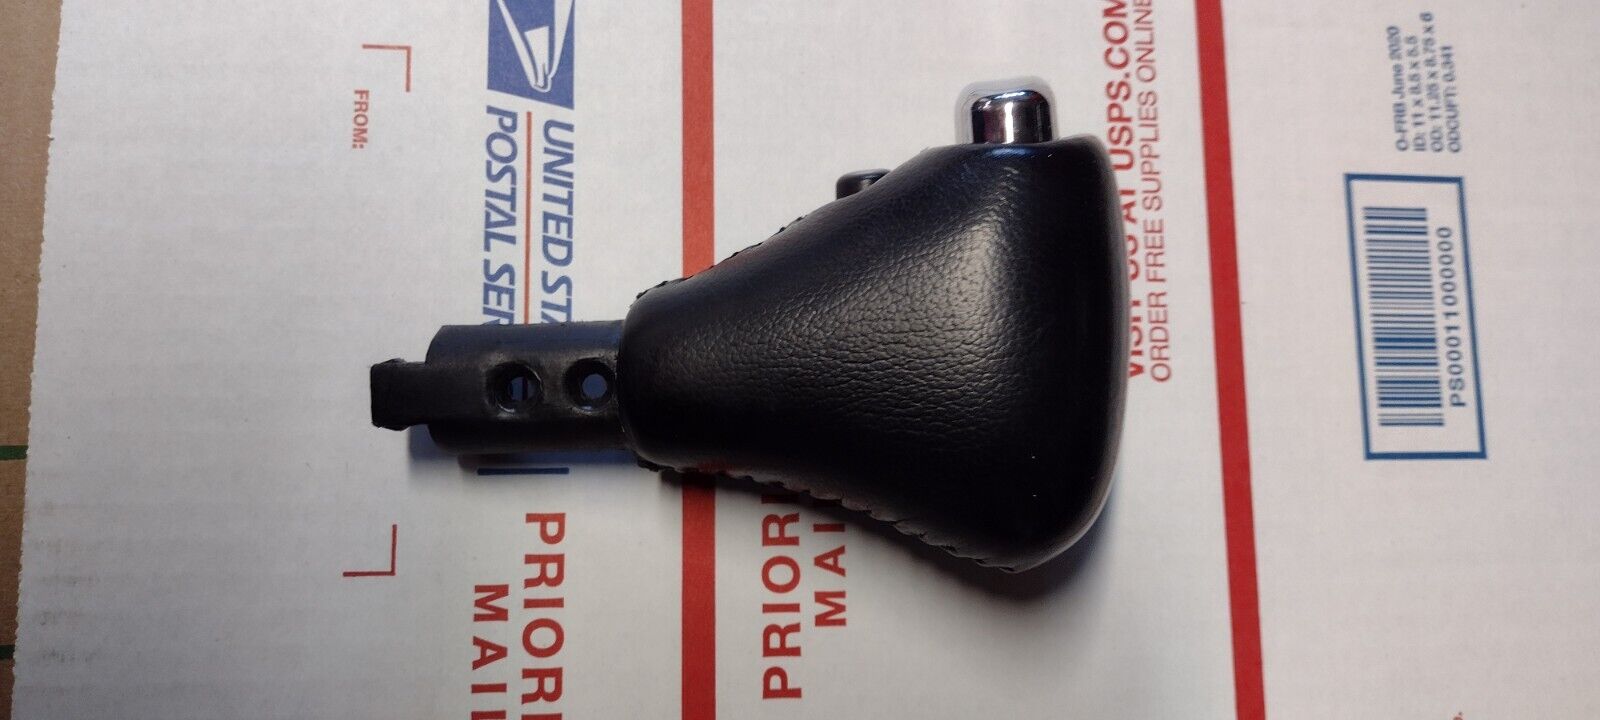 97 - 98 Lincoln Mark VII / Mark 8 leather shifter knob / handle. Shifter